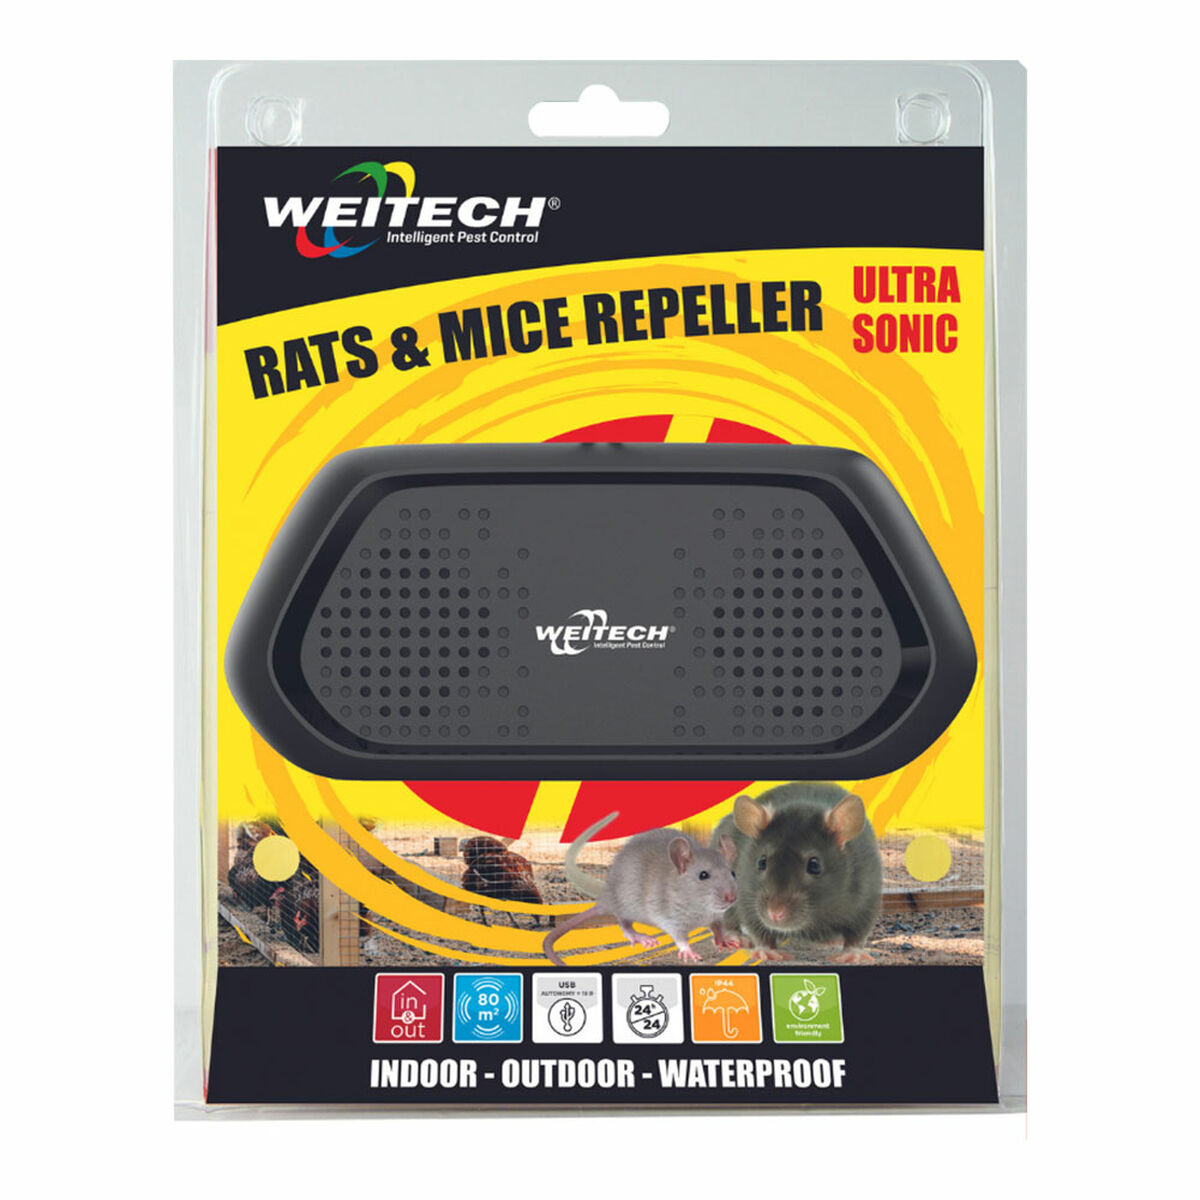 Ultrasonic rat and mouse repeller Weitech